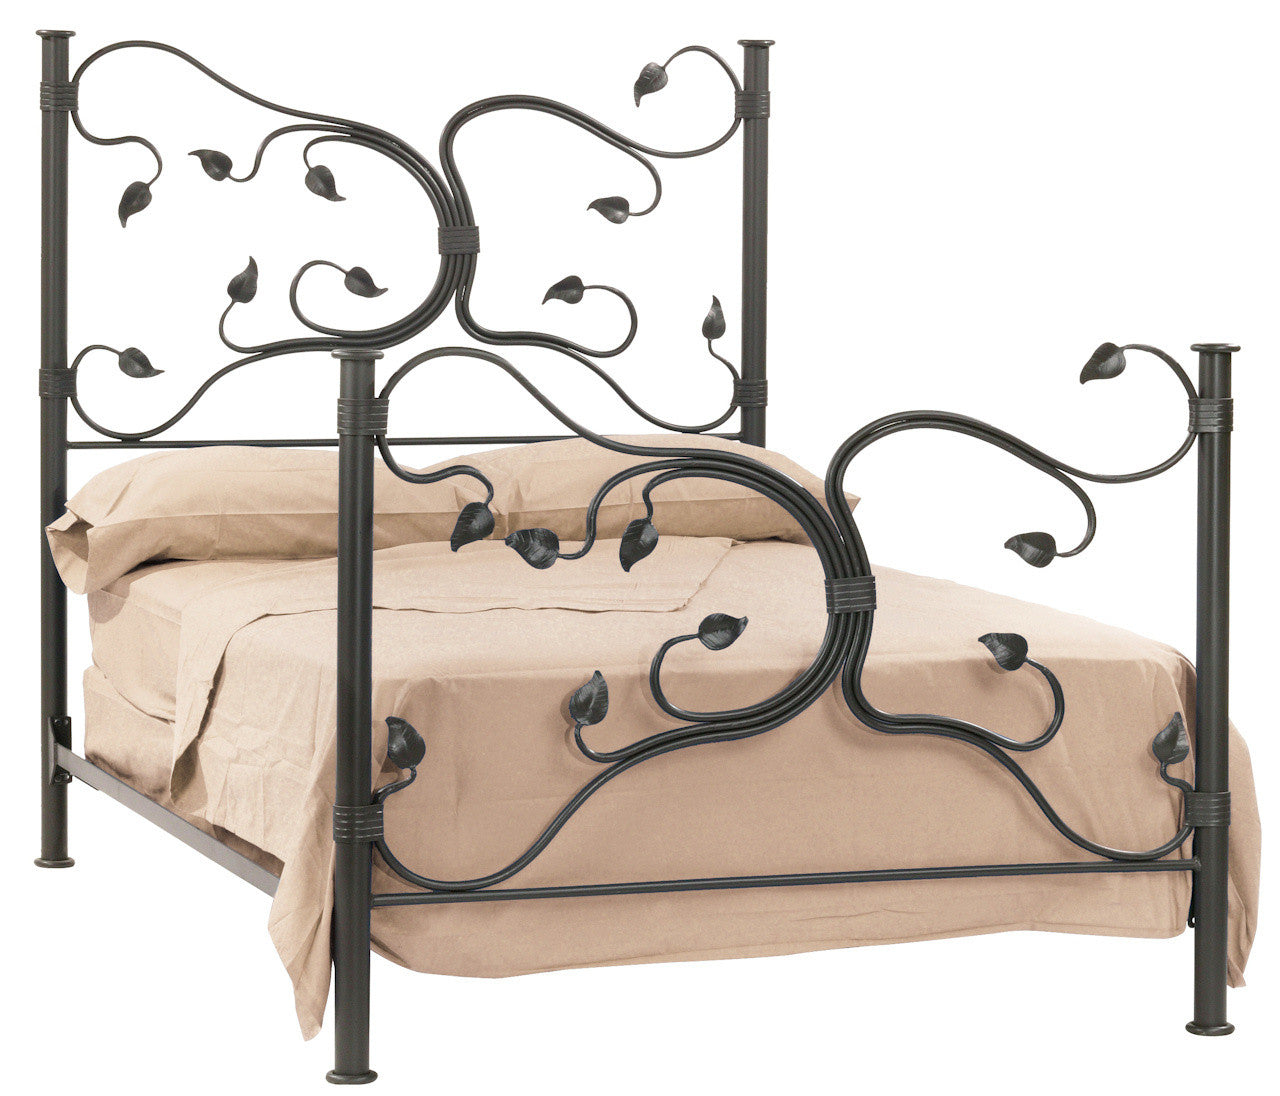 Stone County Ironworks 900-783 Eden Isle King Bed